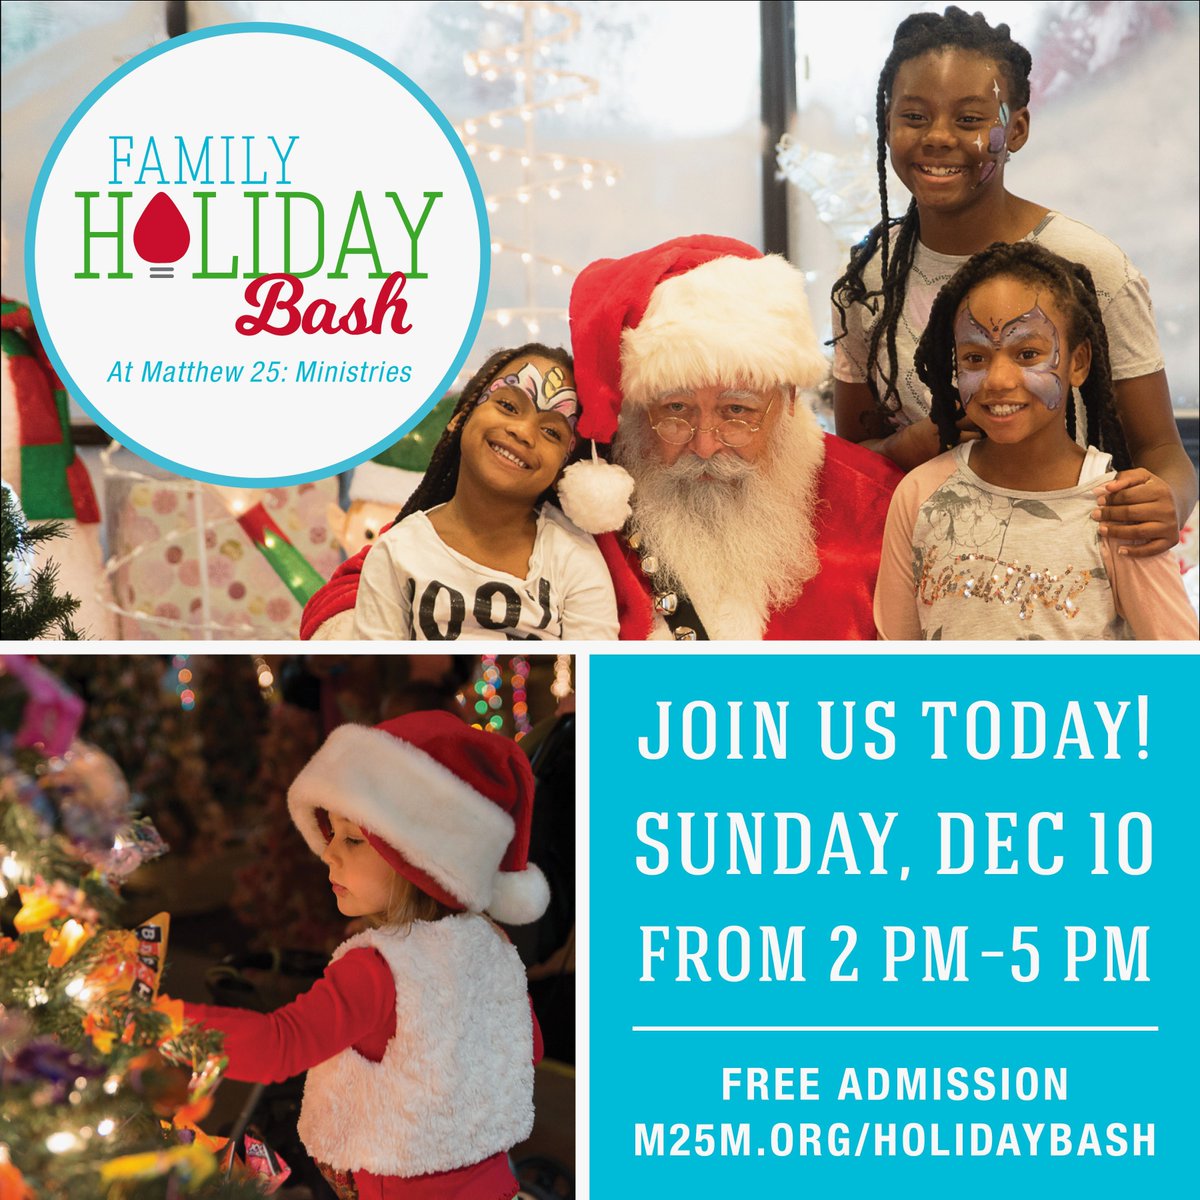 Bring the whole family to Matthew 25 today, 12/10 from 2 PM - 5 PM for our Family Holiday Bash 🎄 Admission is FREE for all to enjoy photos with Santa, a candy forest, games, and more! More info at m25m.org/holidaybash. Donations accepted to benefit A Kid Again's work.